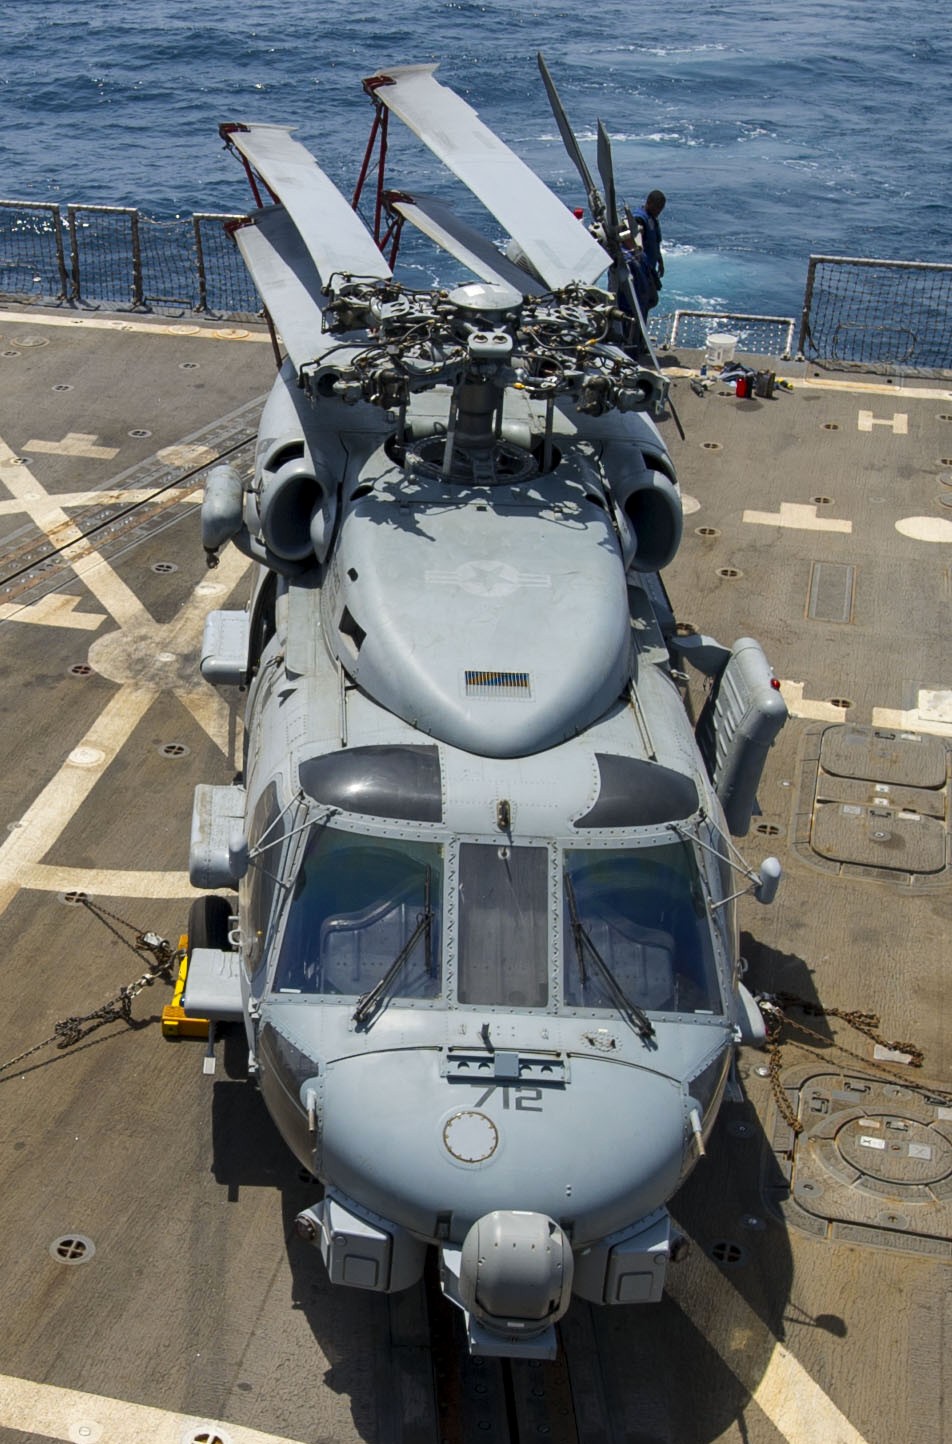 hsm-70 spartans helicopter maritime strike squadron mh-60r seahawk 2014 49